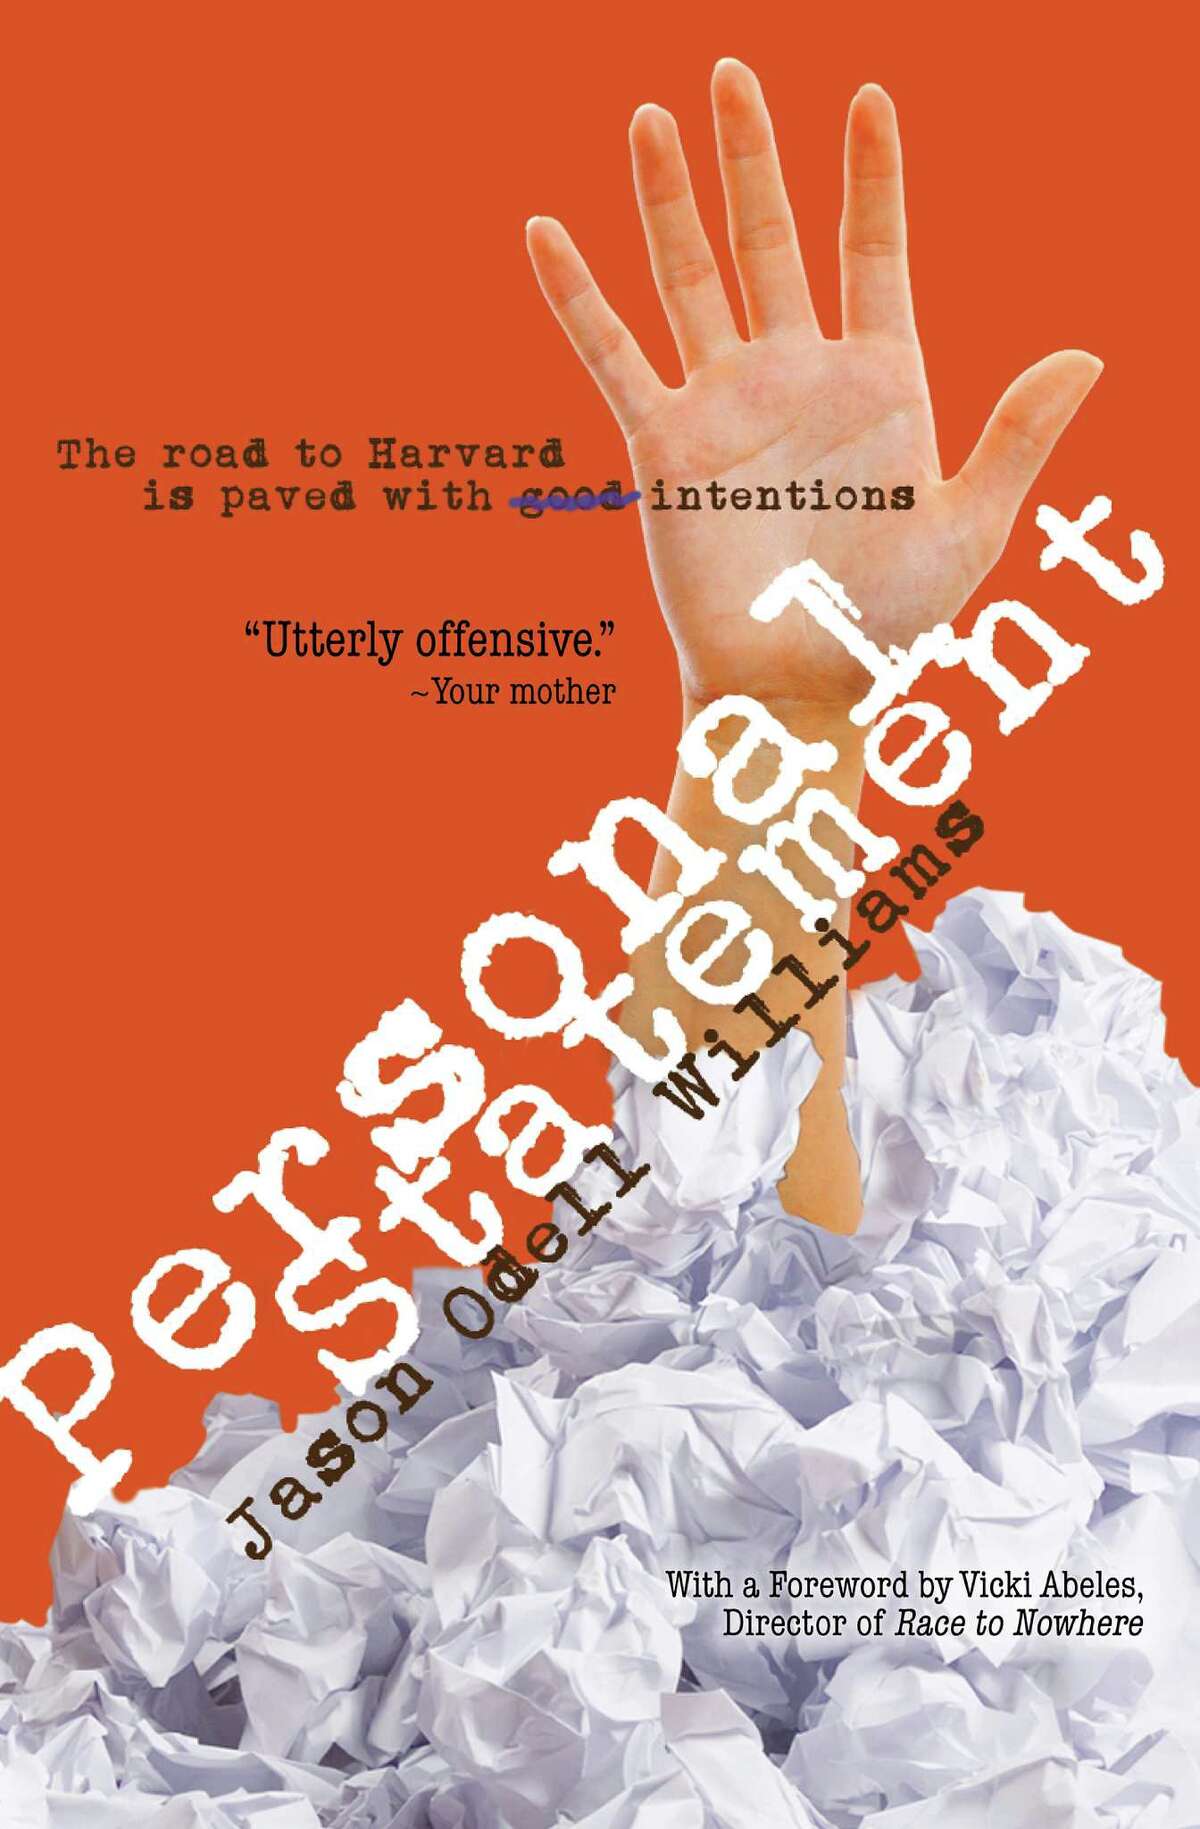 Jason Odell Williams will talk about his new young adult novel, "Personal Statement," at the Westport Public Library on Tuesday, Oct. 1 at 7:30 p.m.